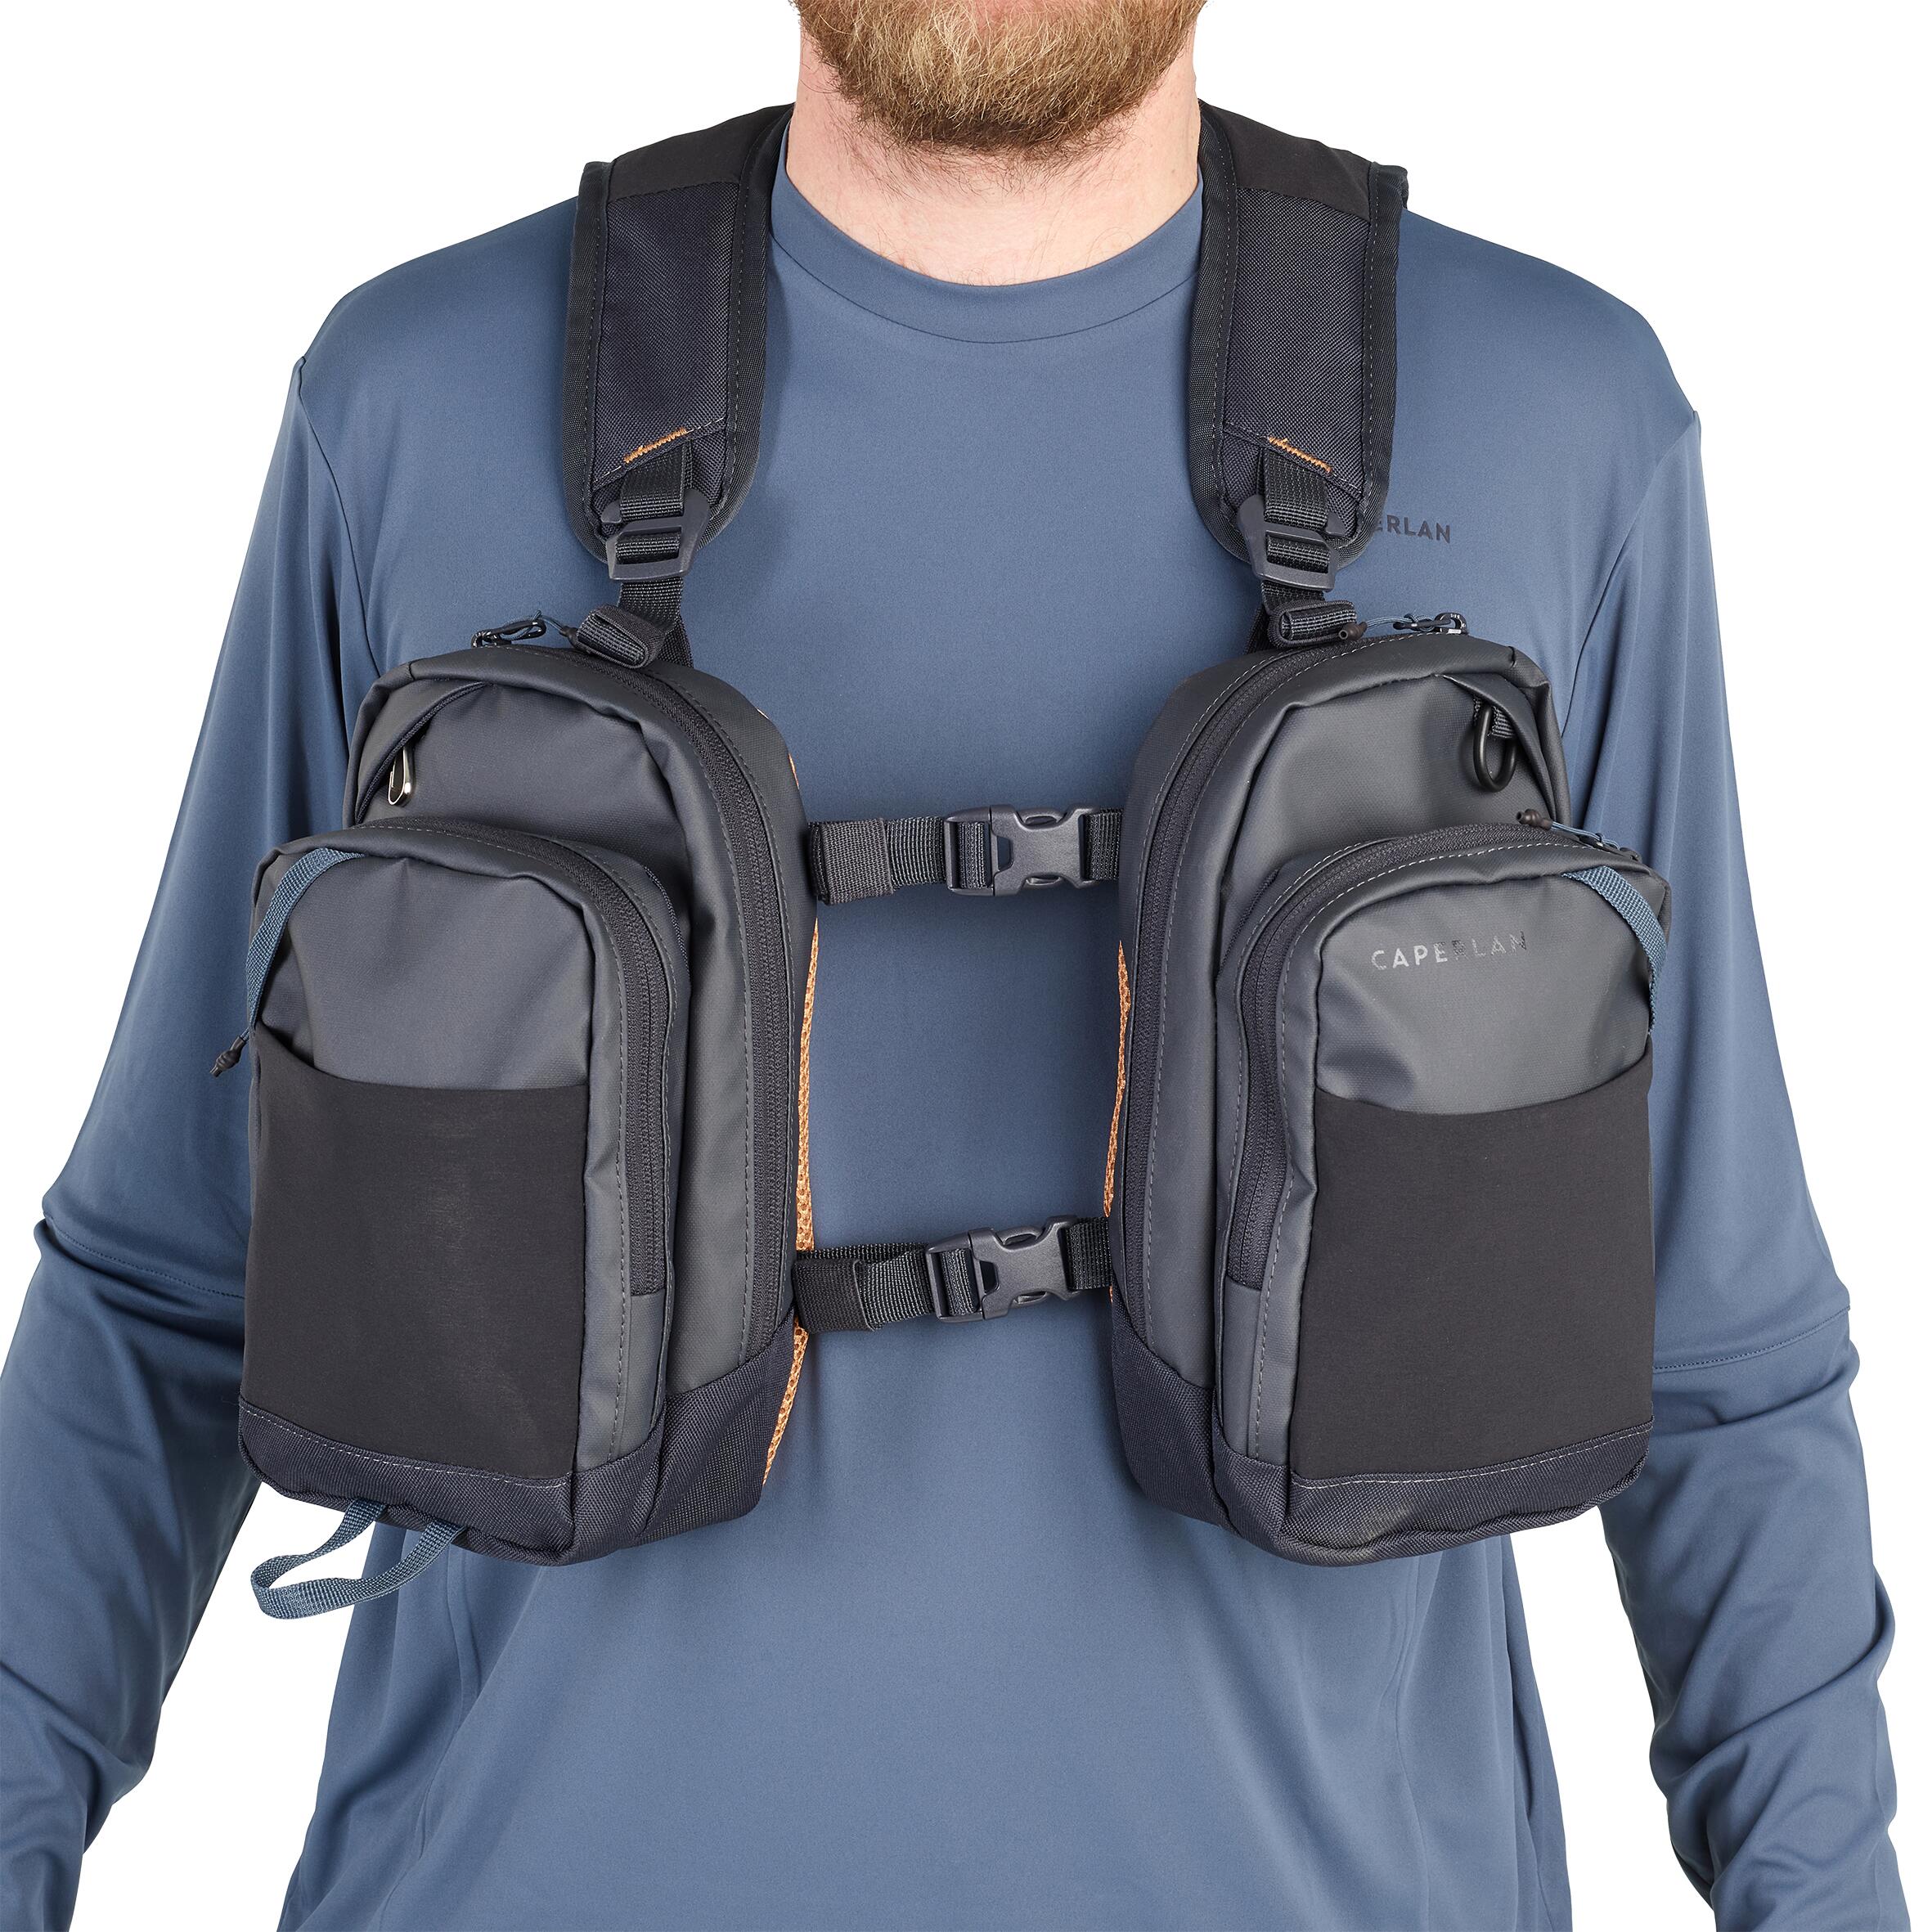 hPa Chest Pack